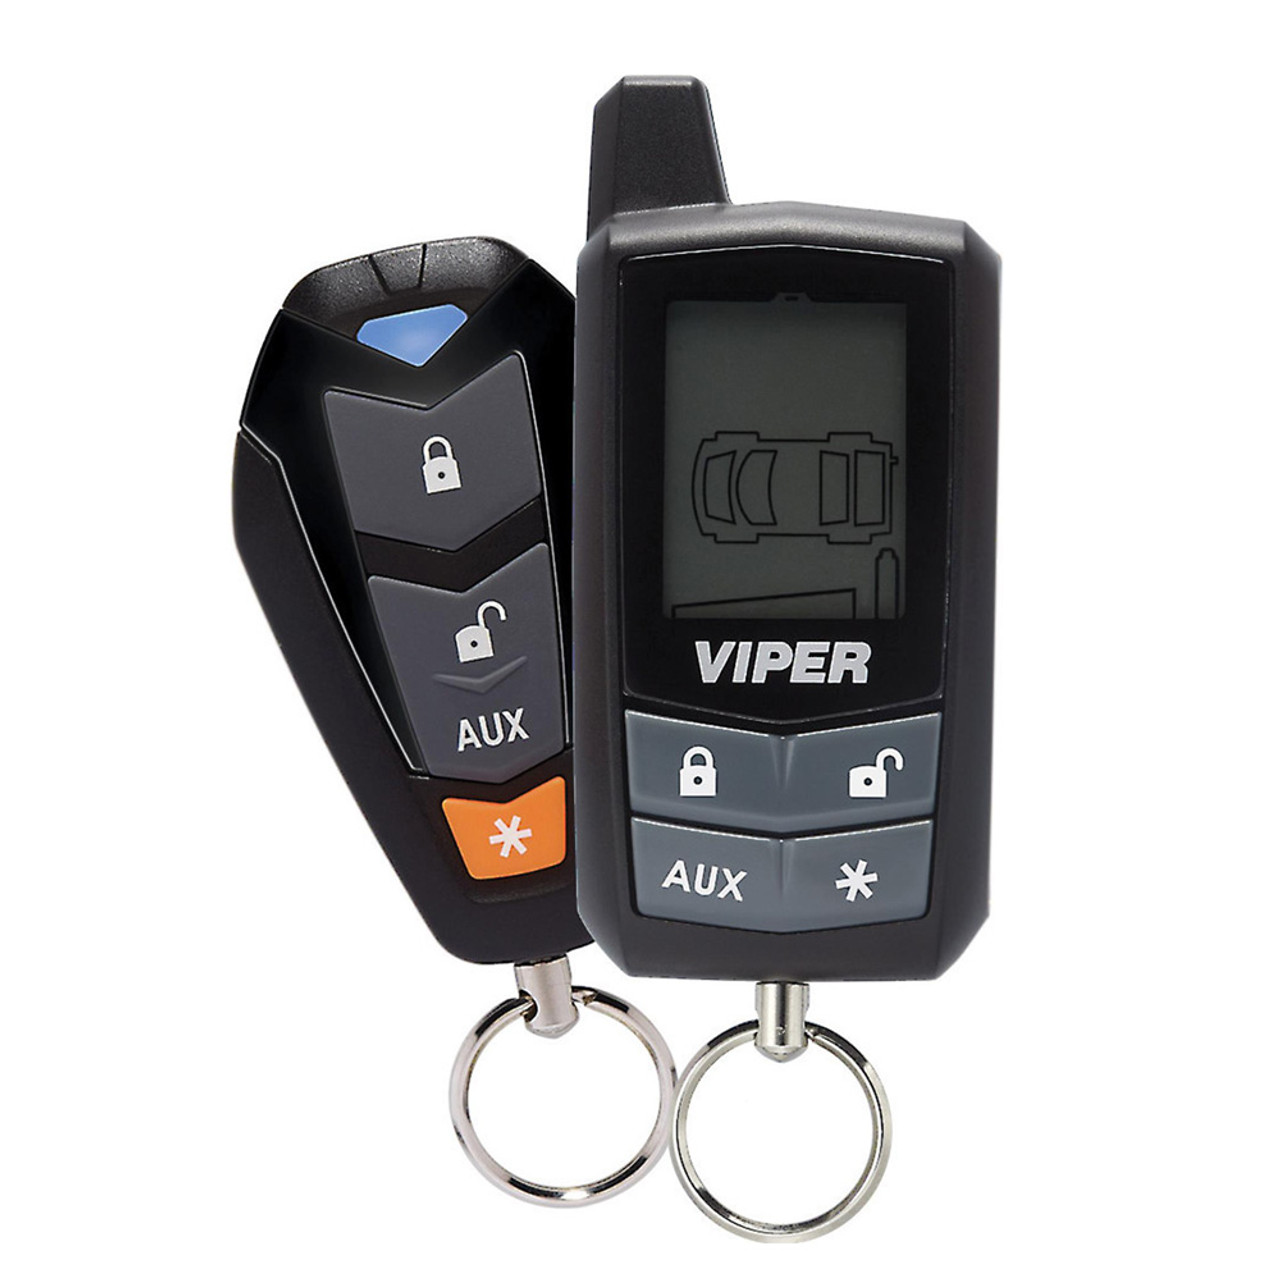 Viper 3305V Security System with 2-way LCD Remote and Keyless Entry